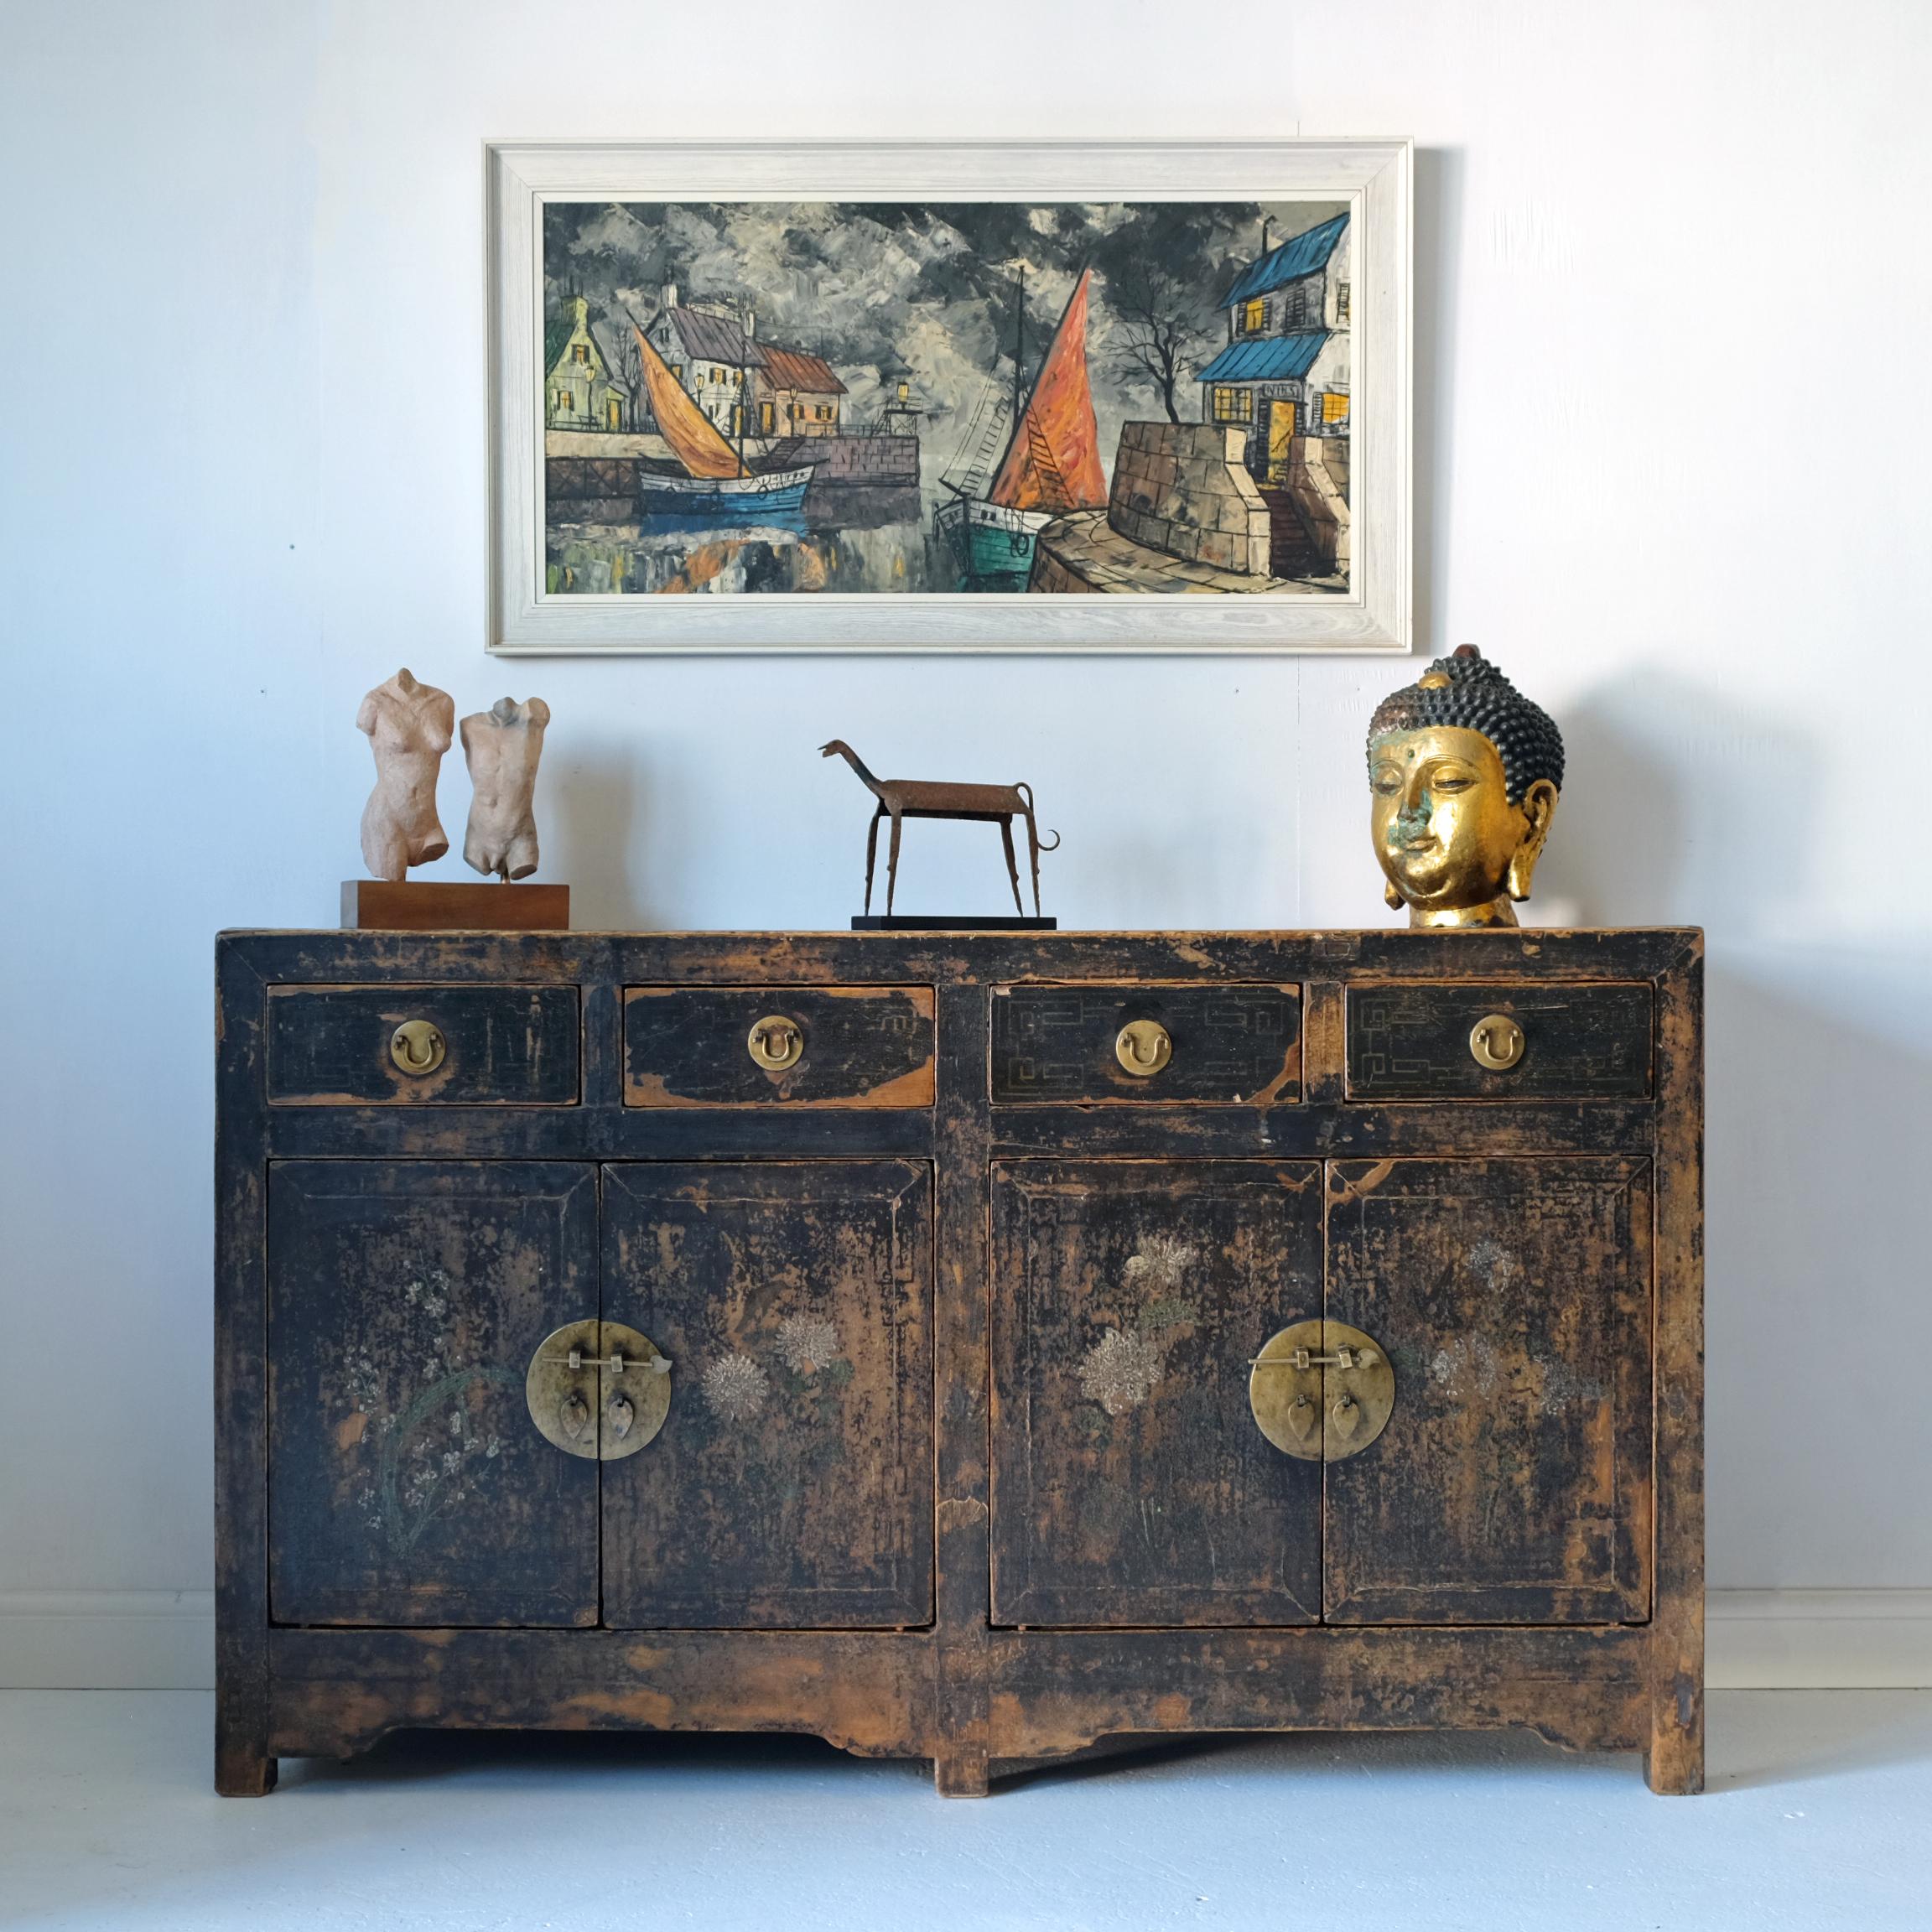 A stunning large late 19th century Chinese sideboard cabinet with original paint and lacquer. The lacquer and paint has taken on a sumptuous patina over its 100 or so year life and it’s this that gives the cabinet its unique rustic charm. The